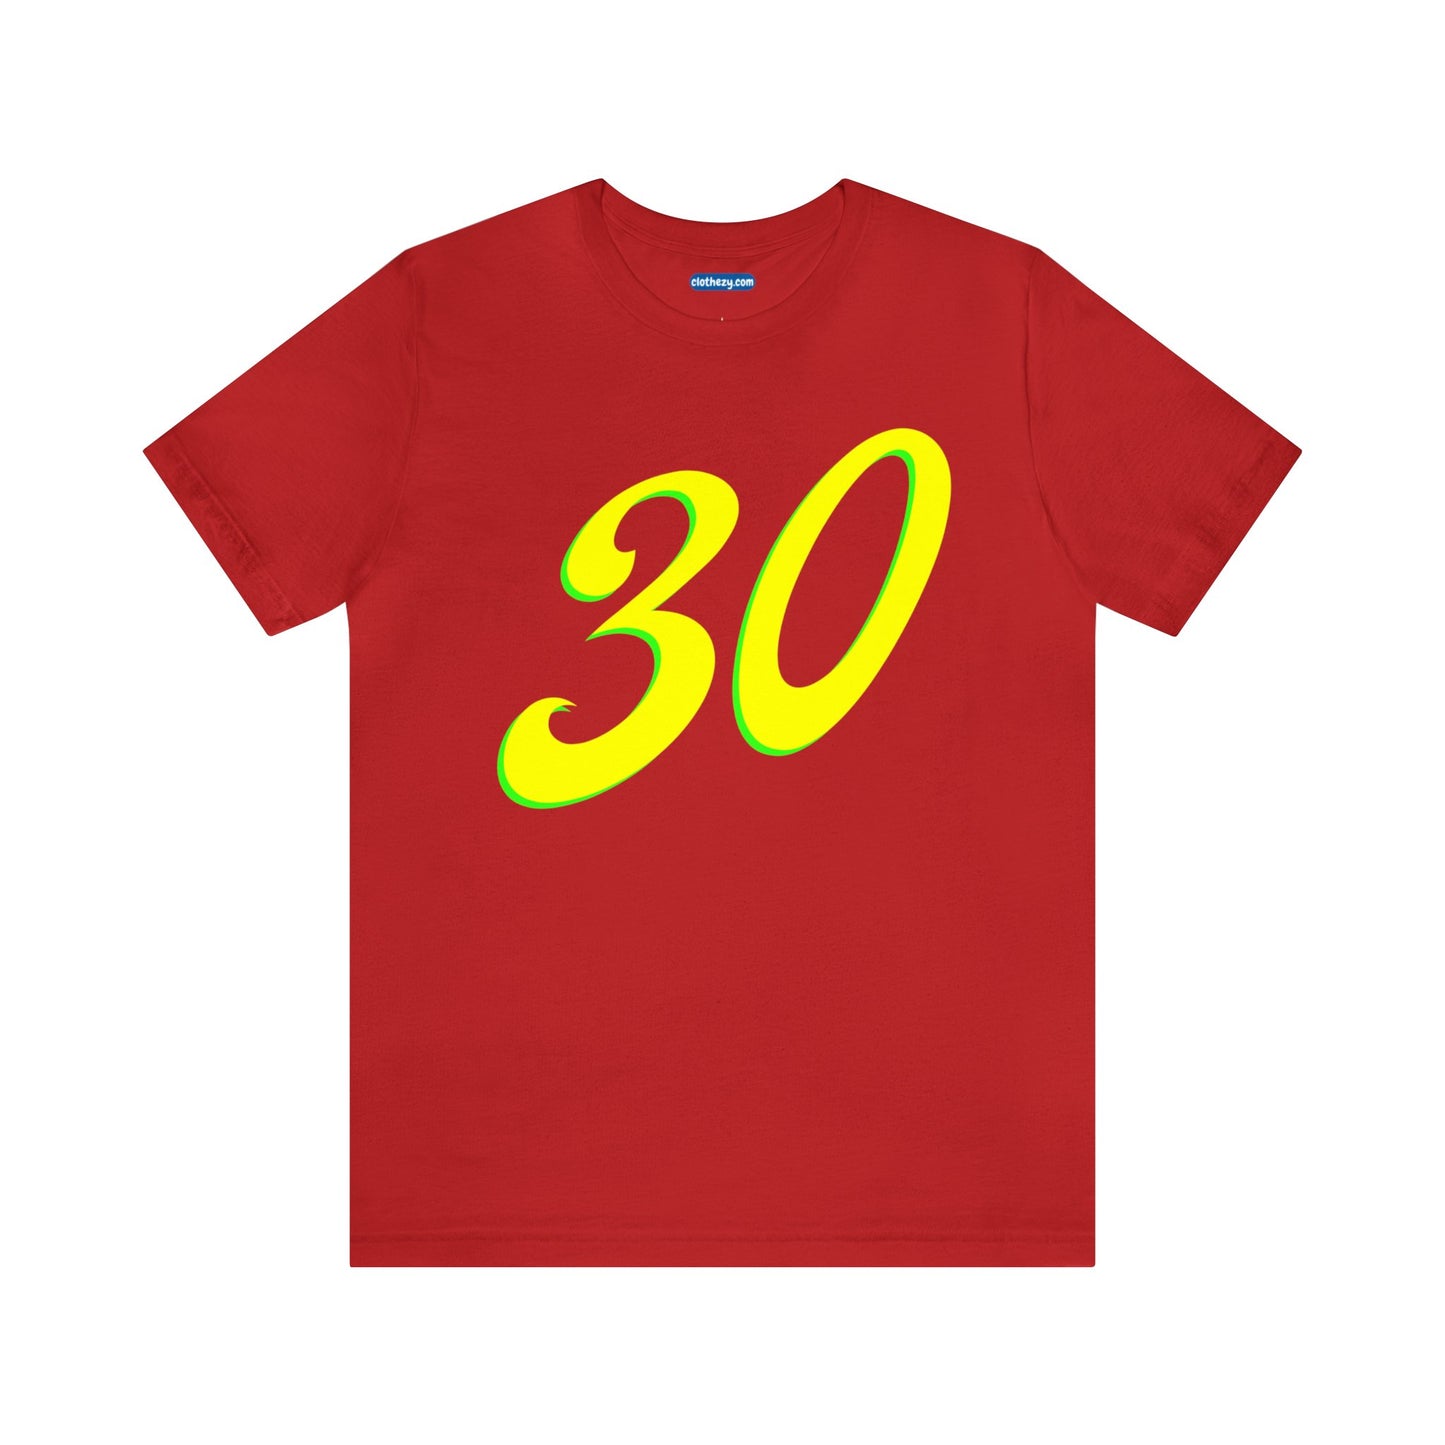 Number 30 Design - Soft Cotton Tee for birthdays and celebrations, Gift for friends and family, Multiple Options by clothezy.com in Red Size Small - Buy Now